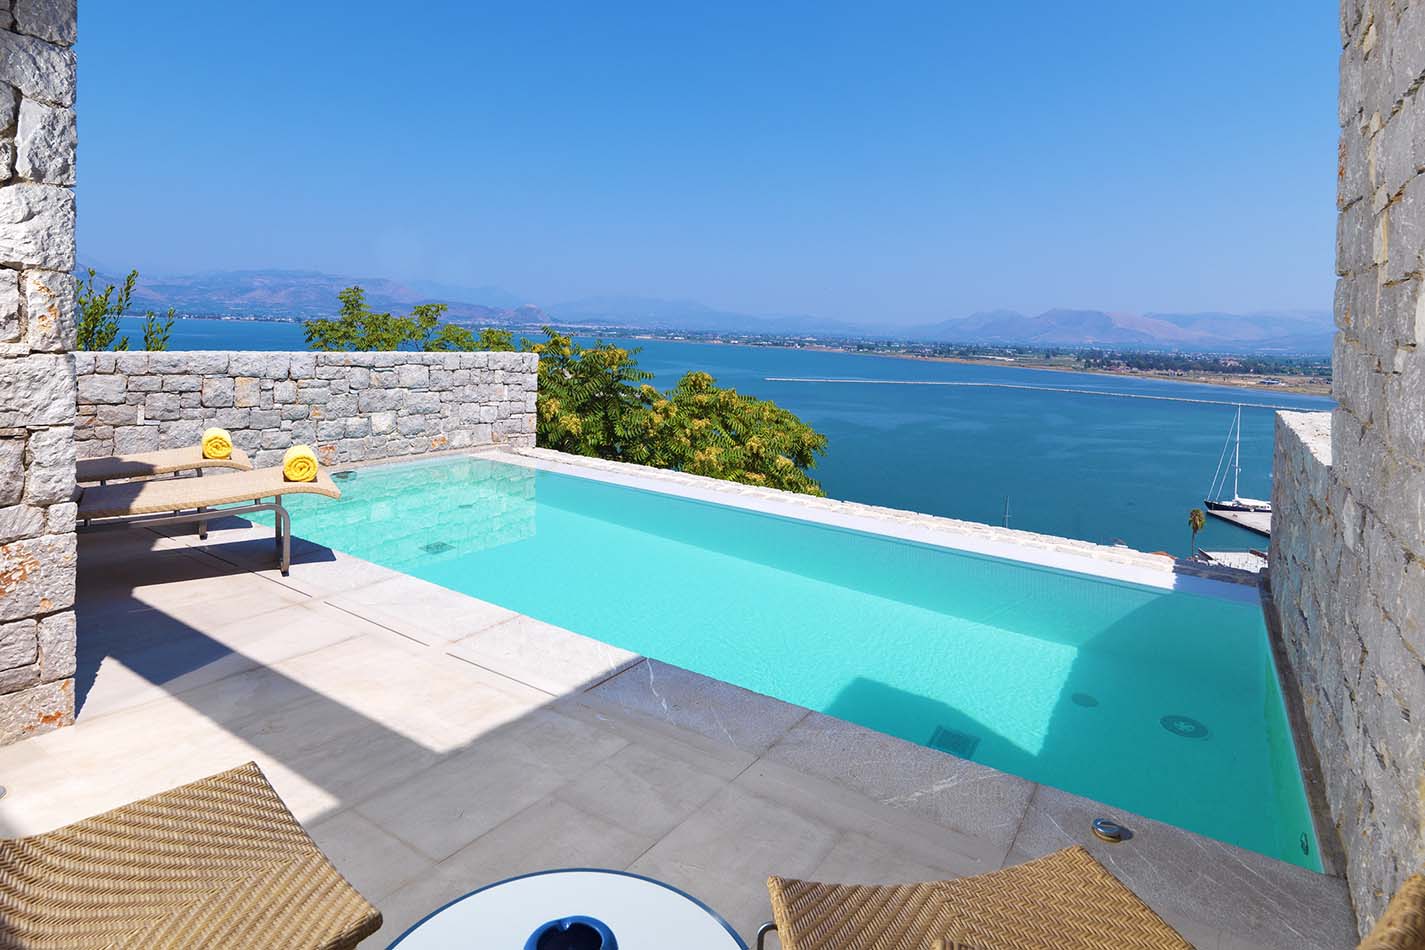 8. Luxury Bungalow Sea View Private Pool